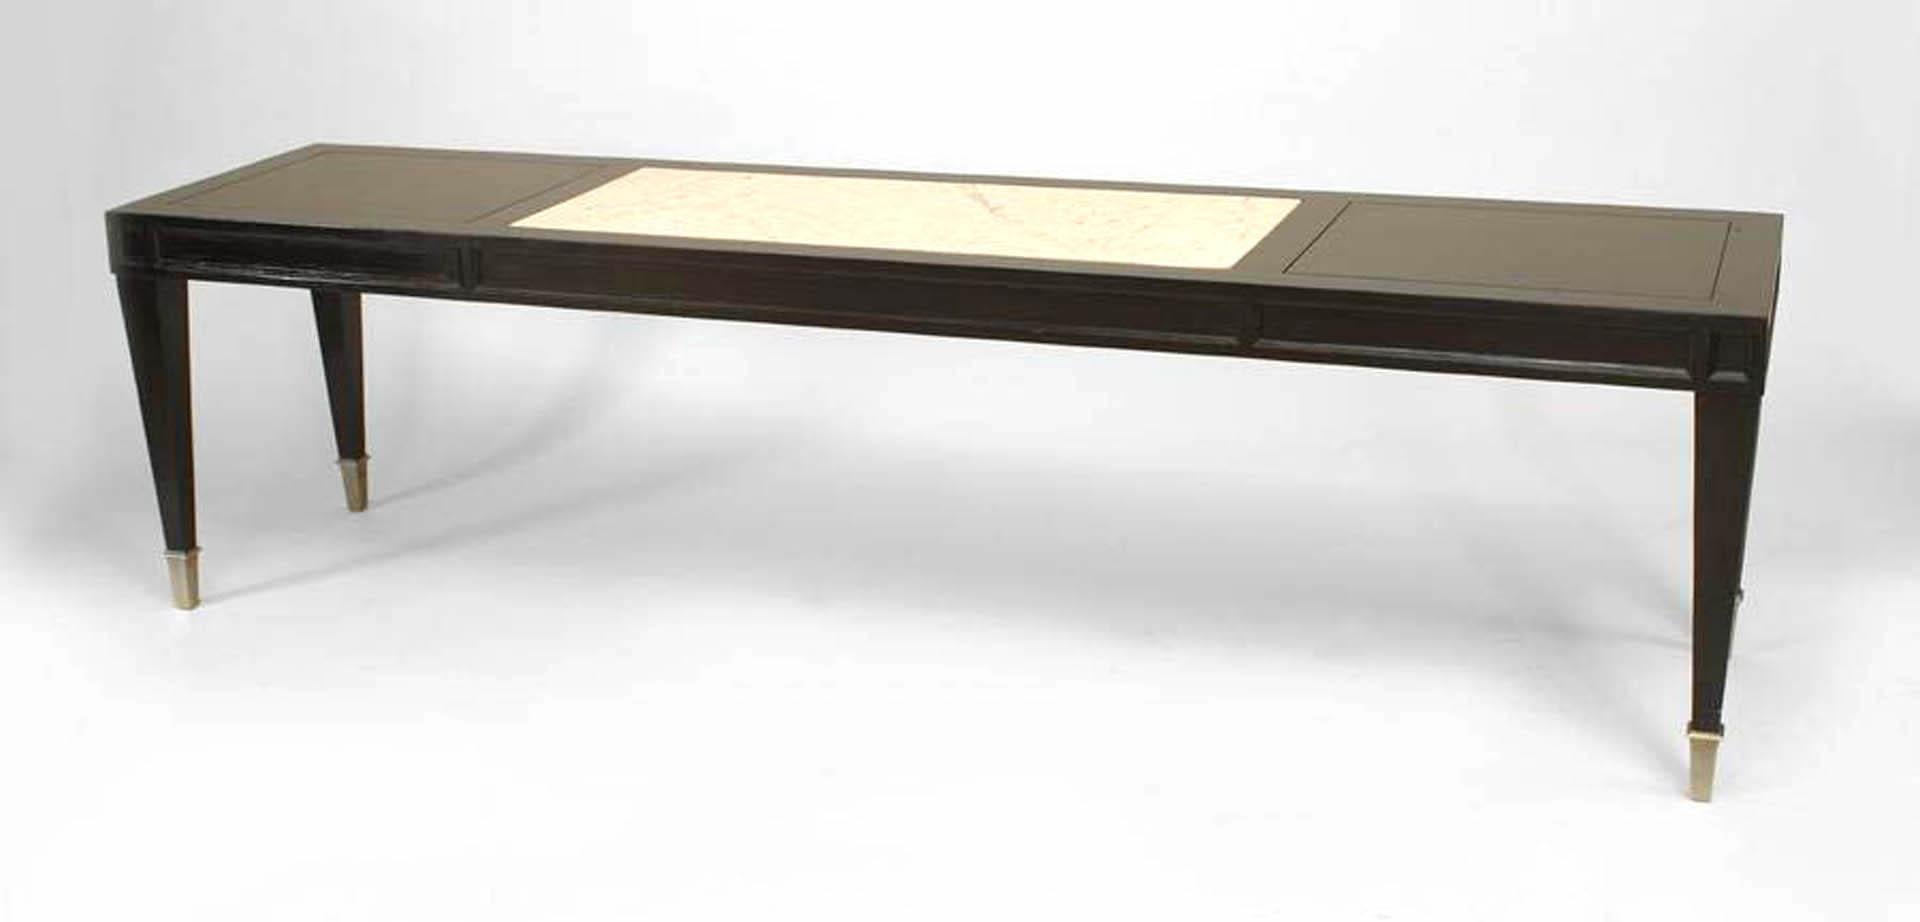 Italian Mid-Century (1940s) ebonized narrow rectangular coffee table with inset white Carrara marble middle section with silver-plated sabot feet.
